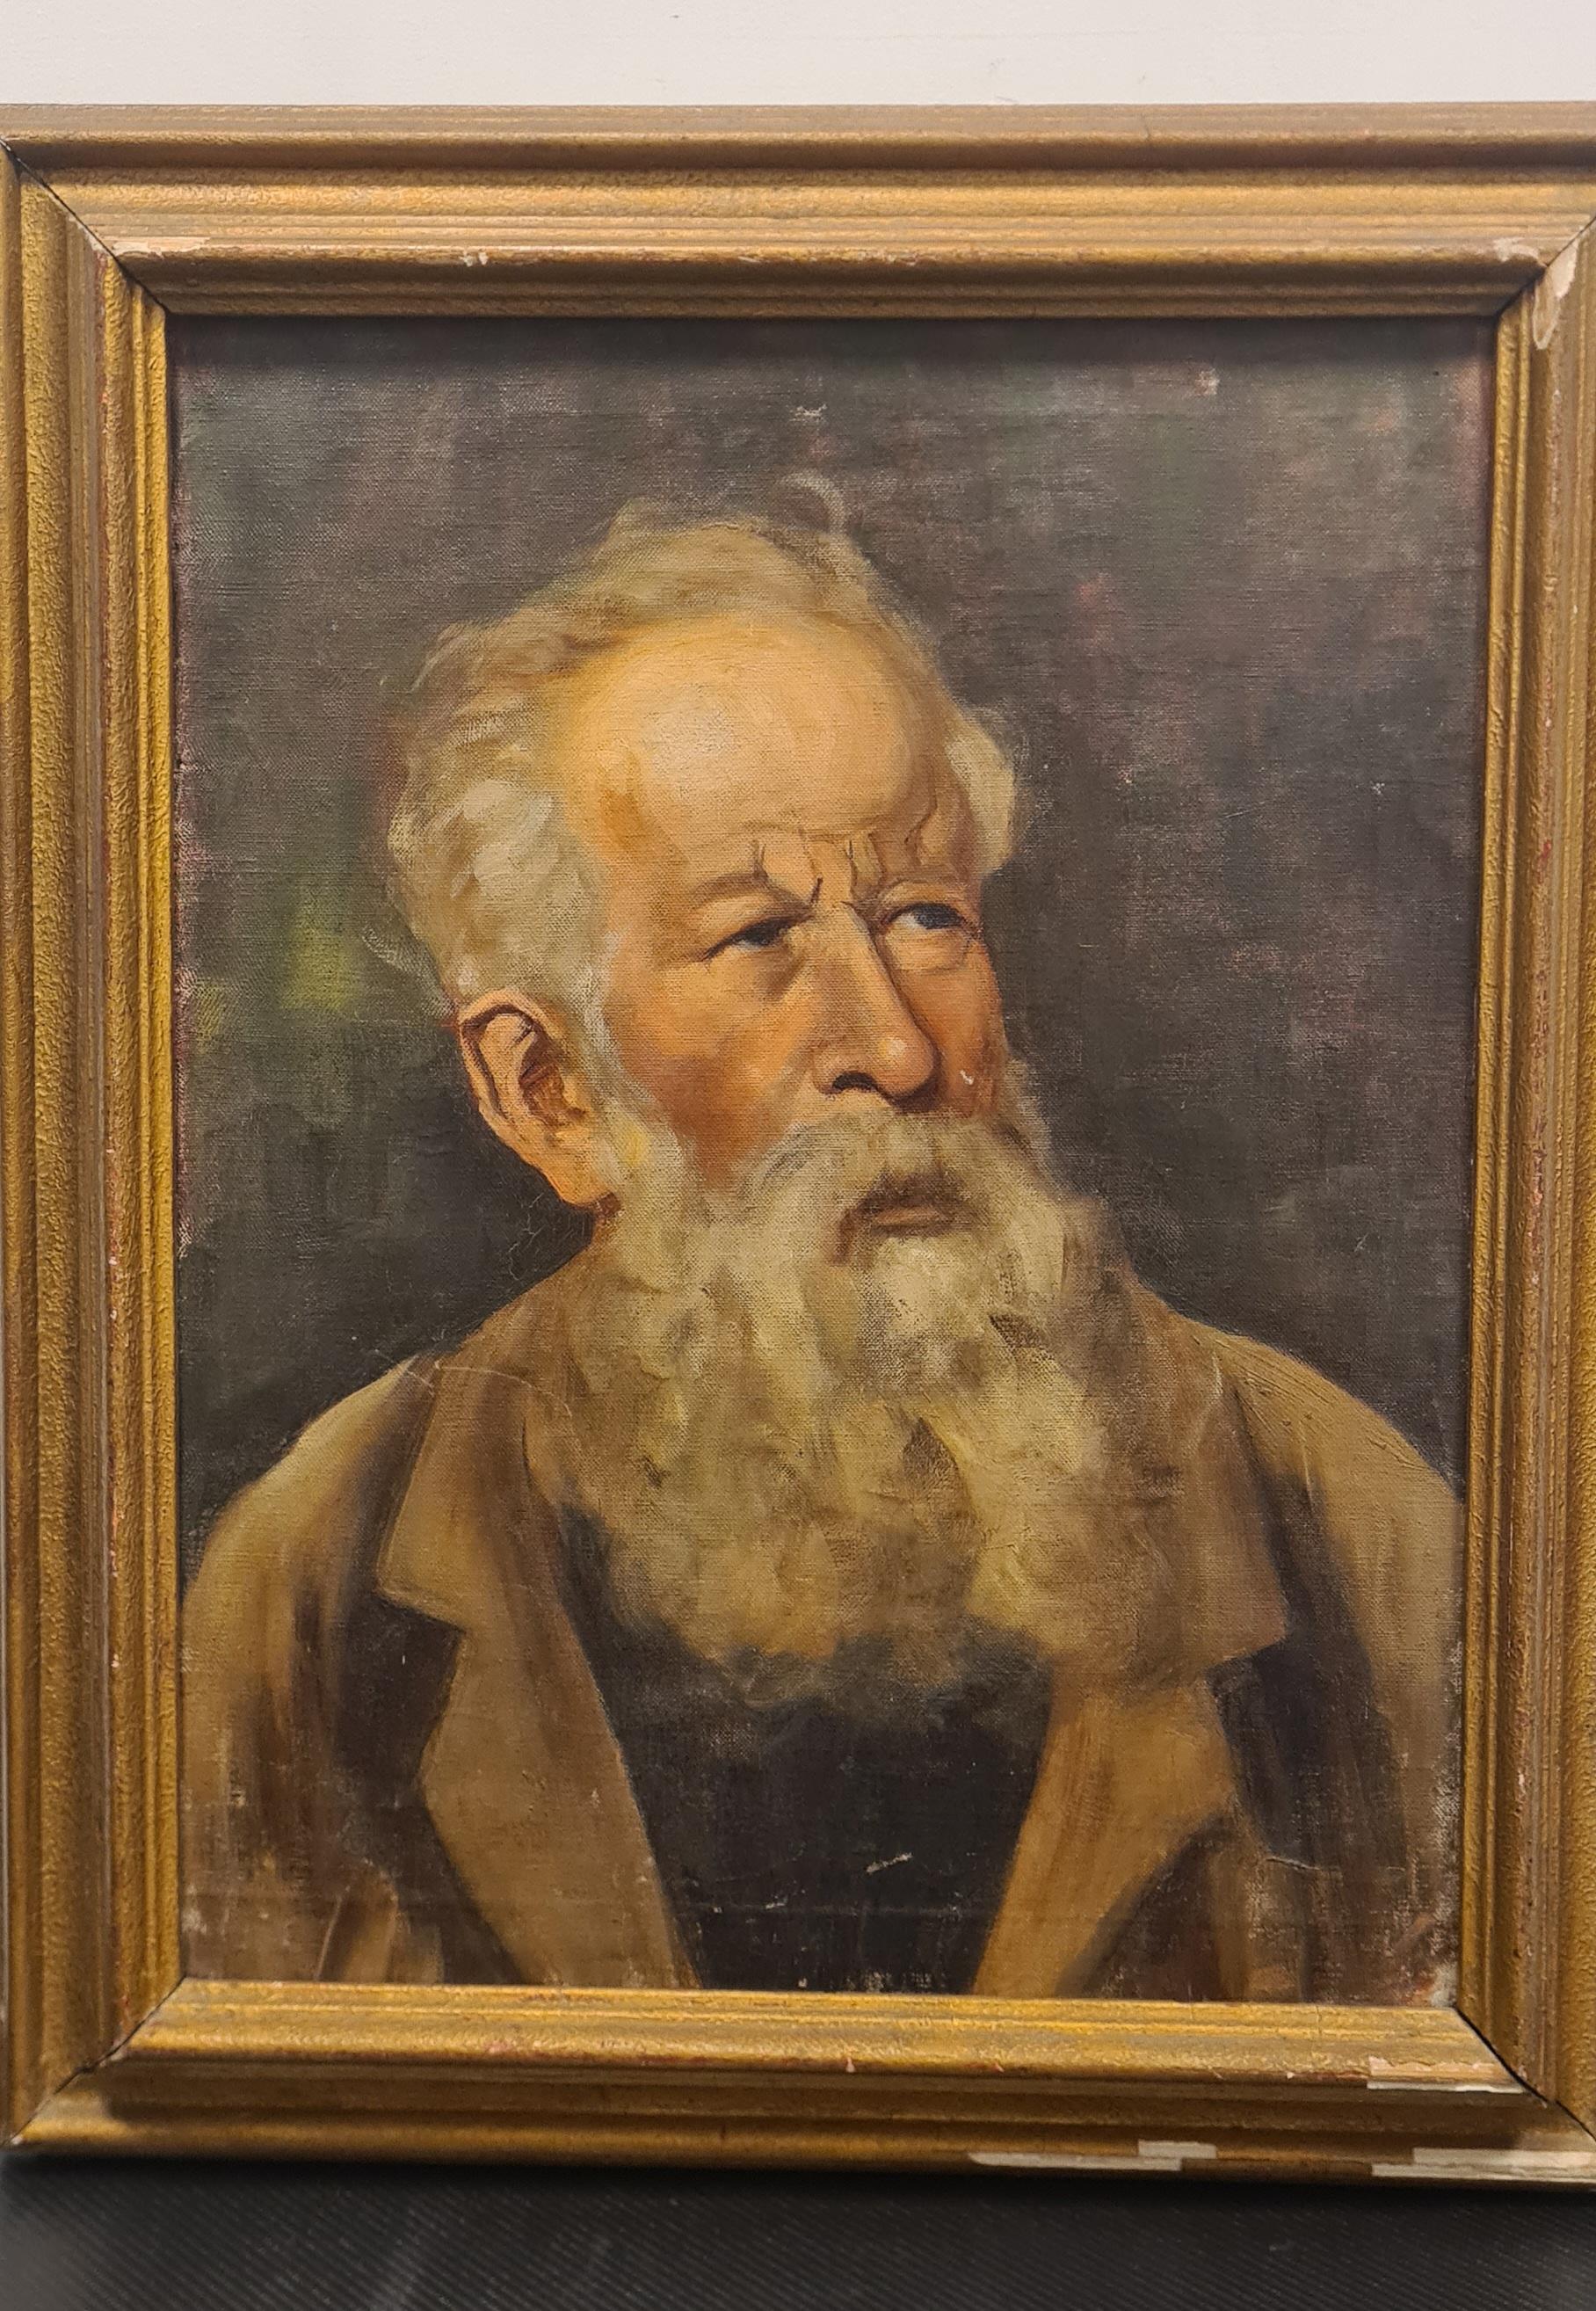 Oil on canvas portrait of bearded man.

Refined portrait probably depicting, given the simple clothes, a man of humble origins with a thick beard.

The portrait is unfortunately unsigned but from the canvas it can be placed in the late 19th